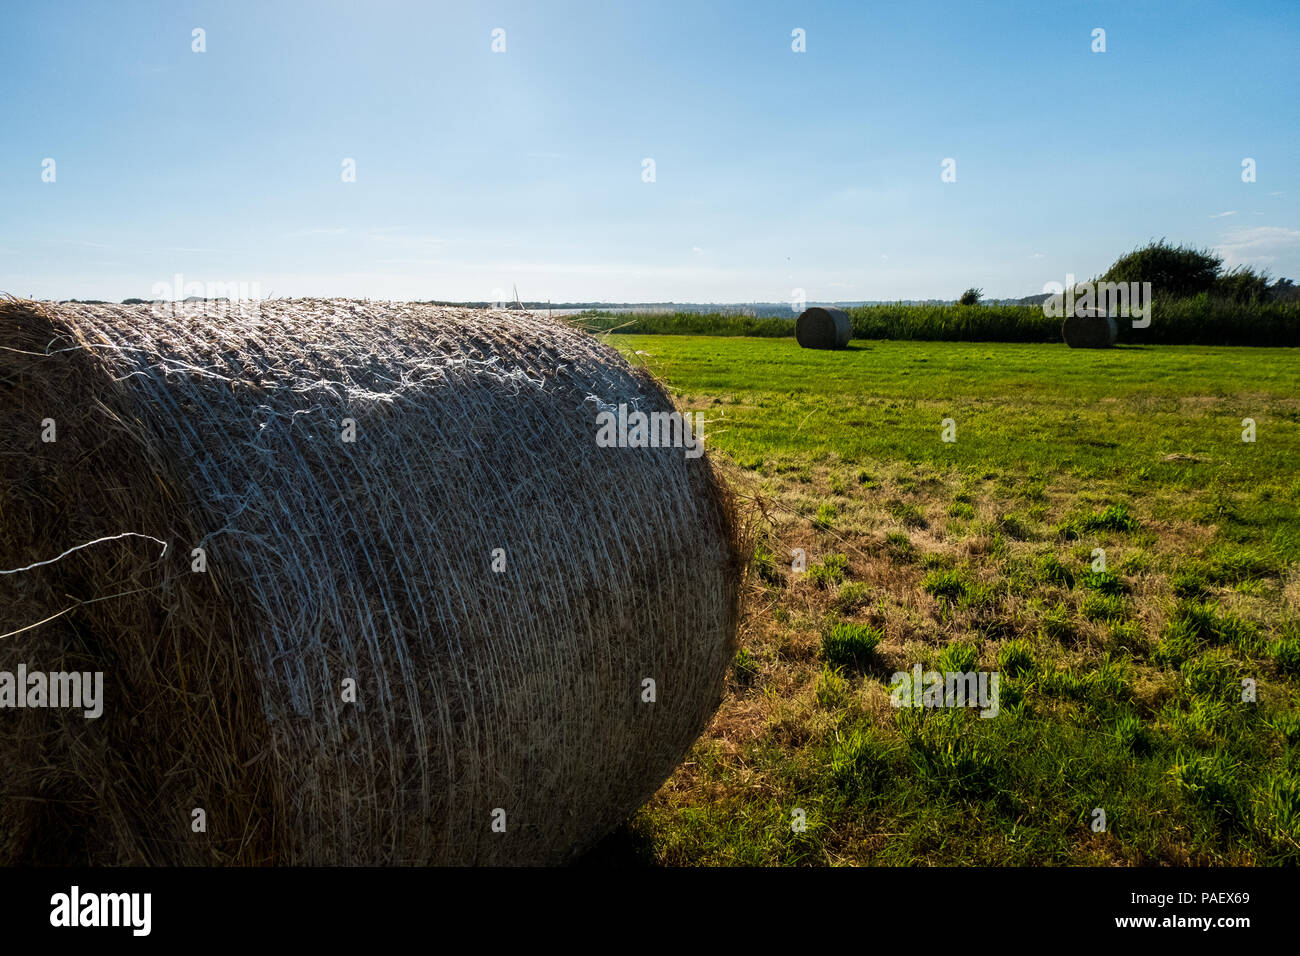 Close-up of a hay roll on a filed. Beautiful background image. Stock Photo